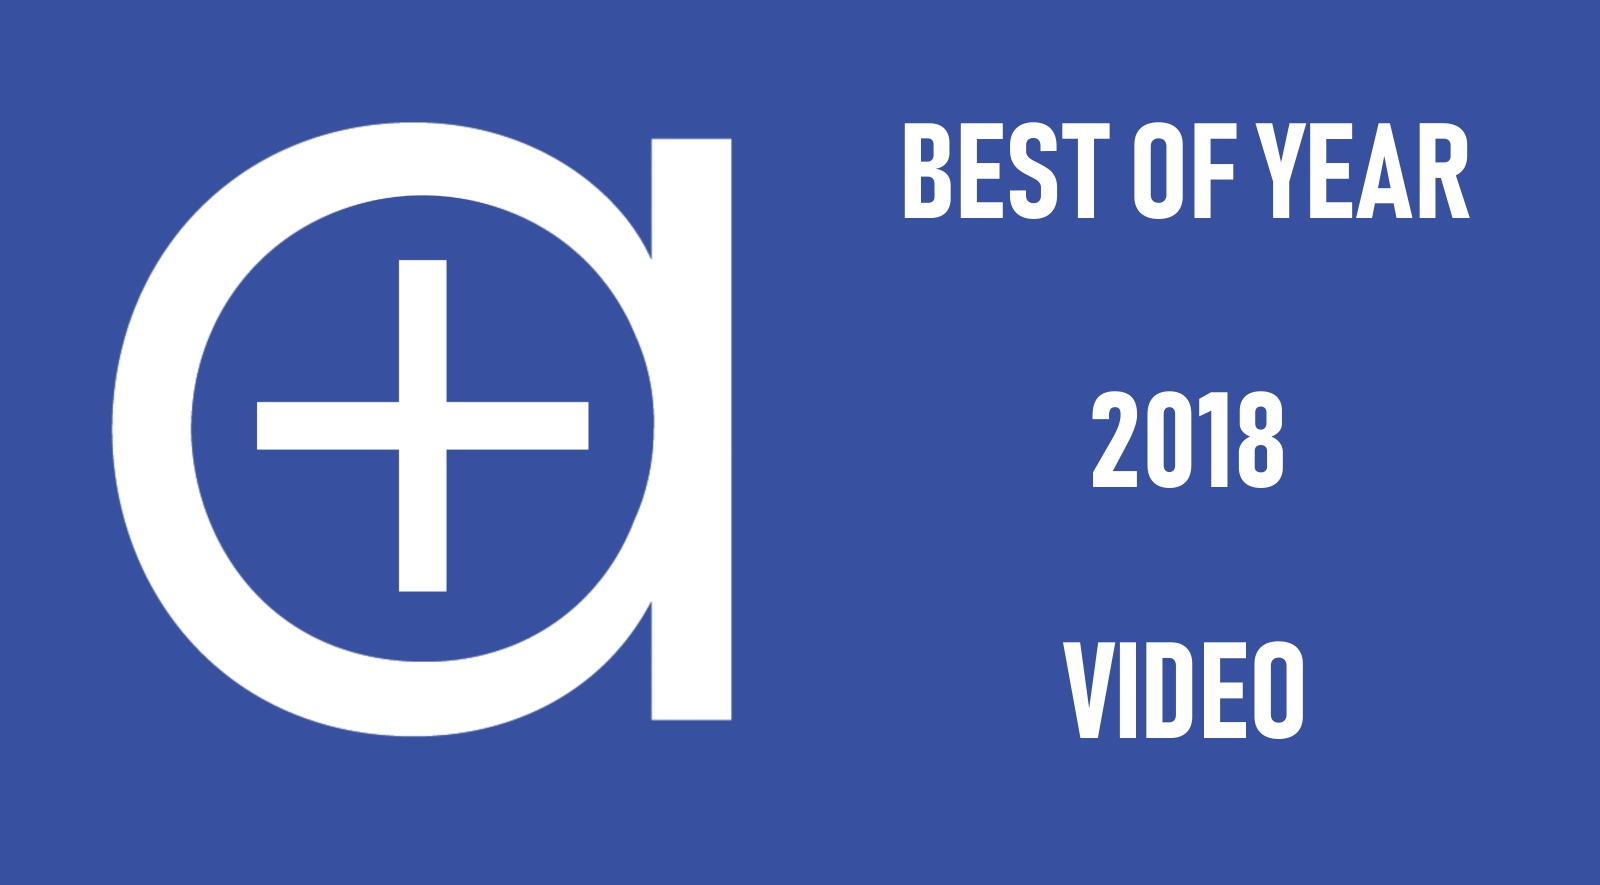 2018 Best of Year Video